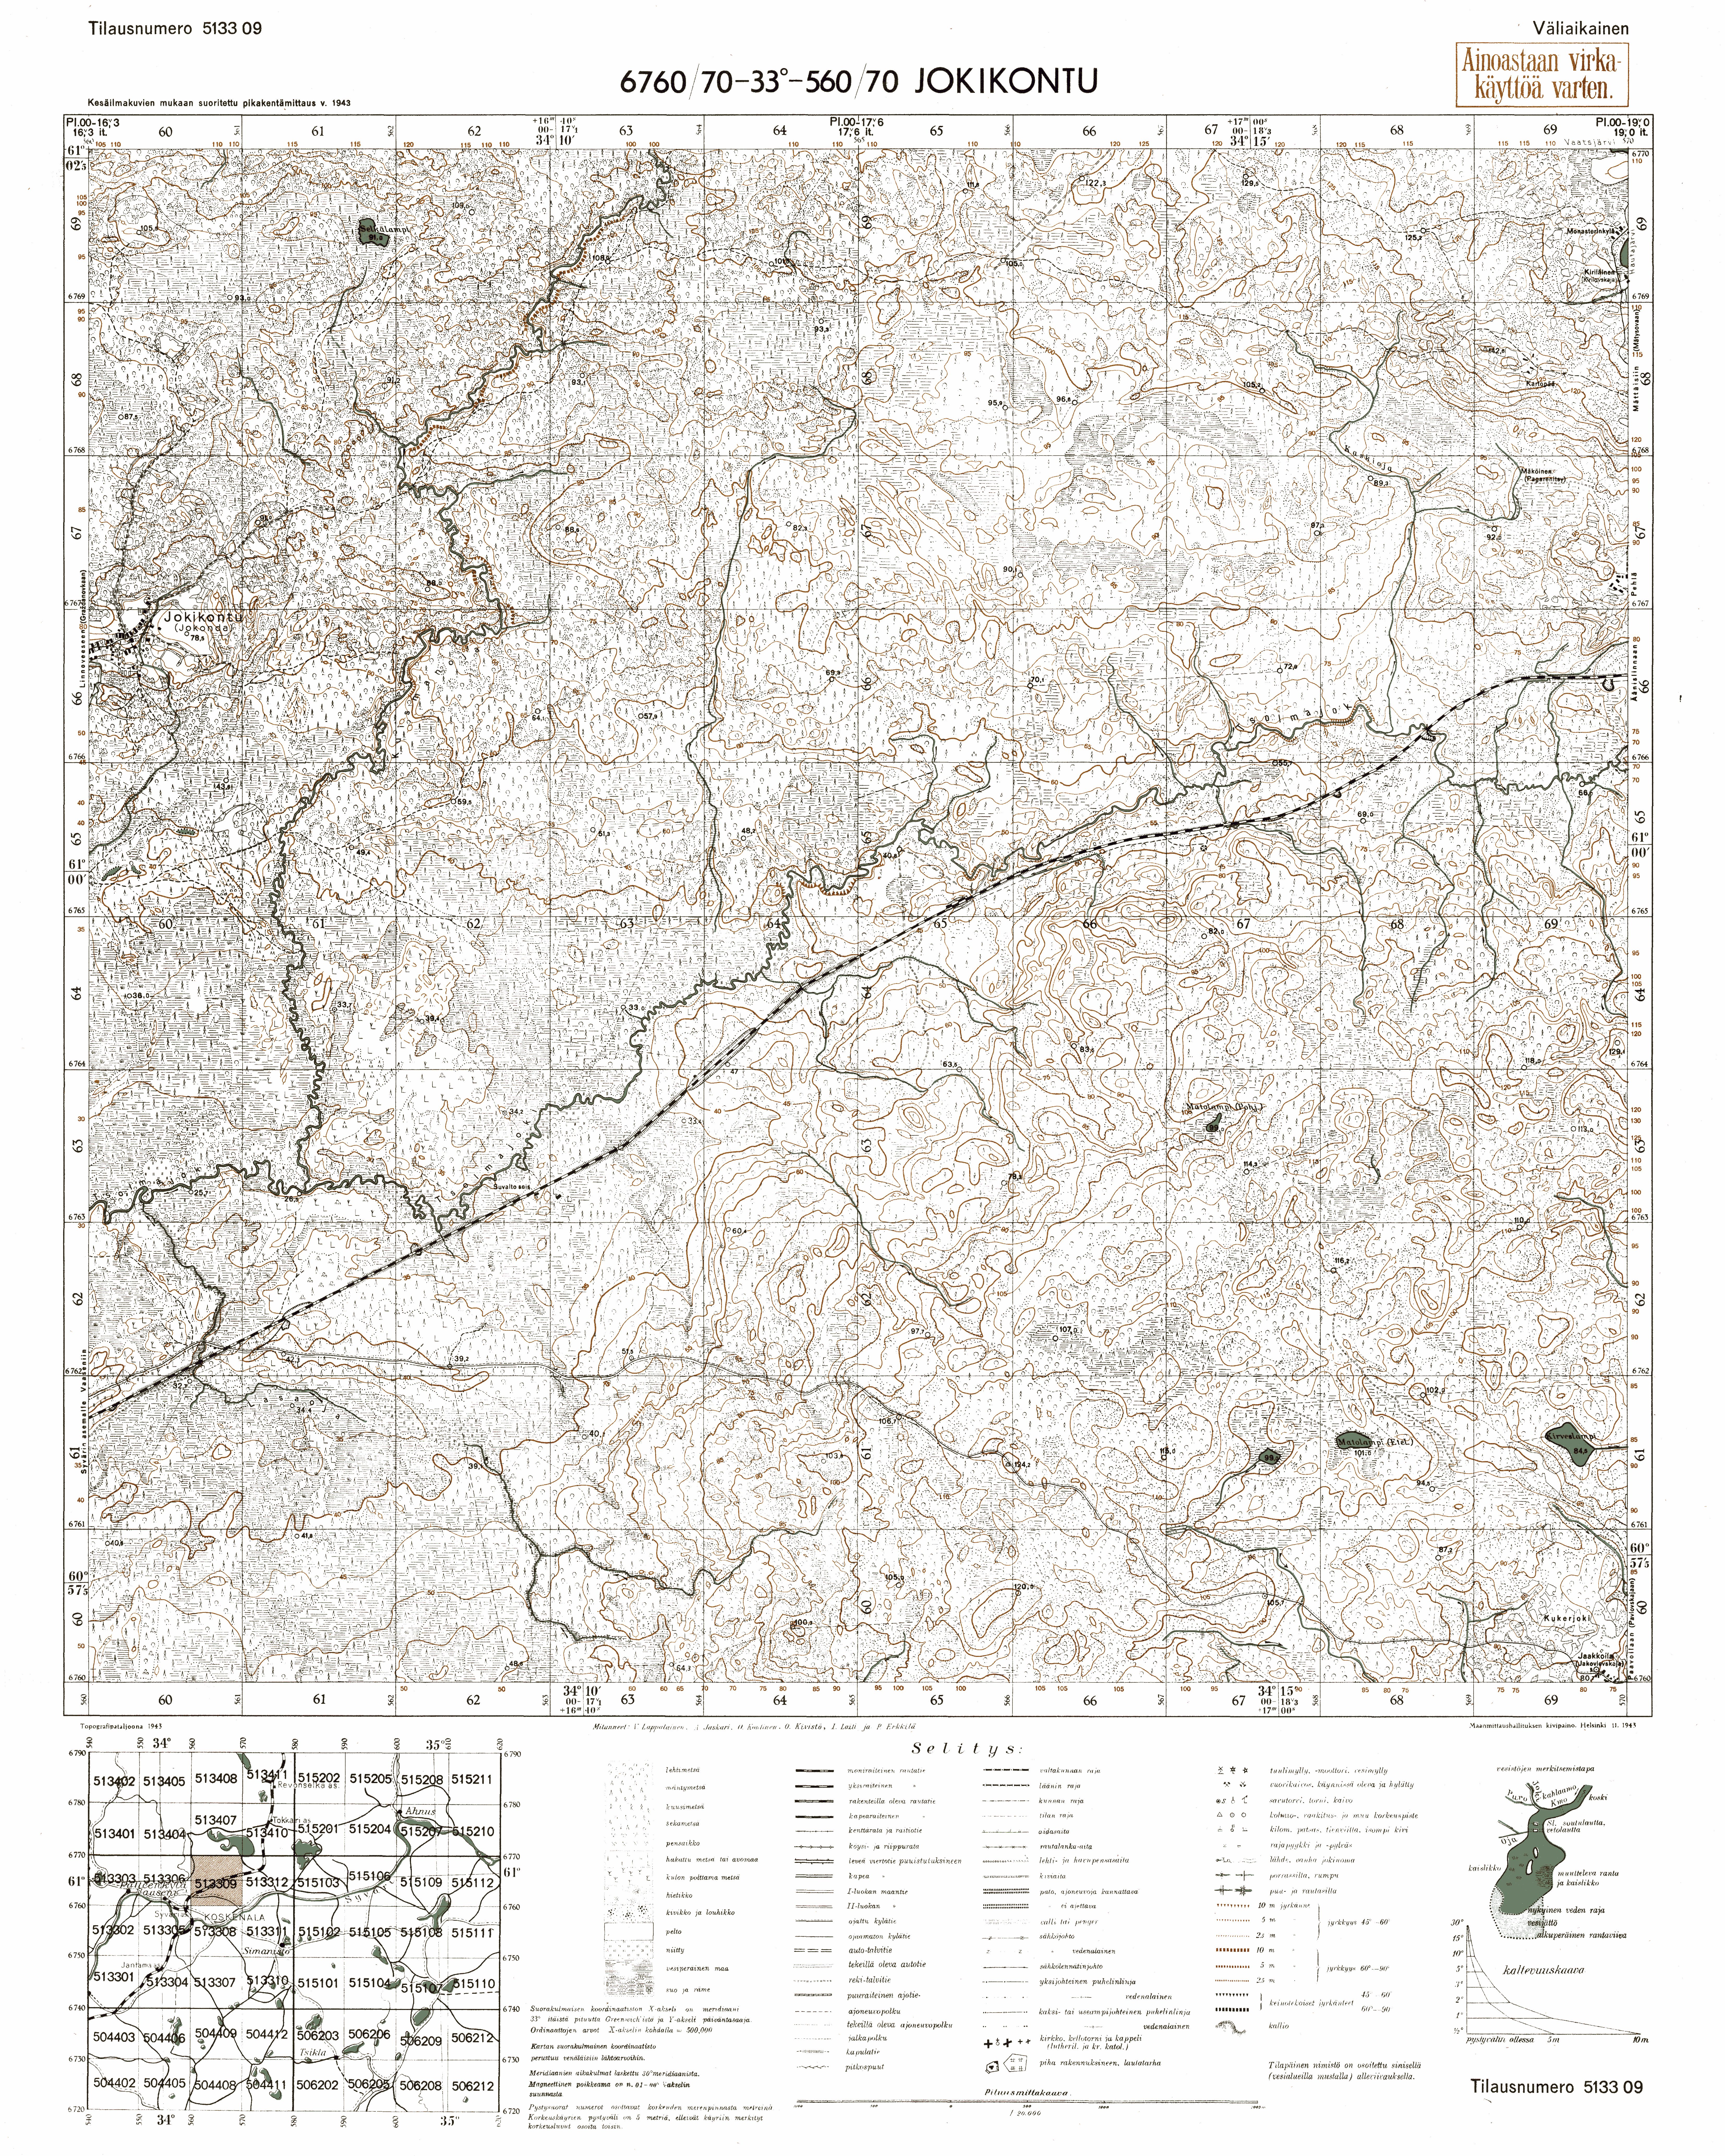 Jekonda Village Site. Jokikontu. Topografikartta 513309. Topographic map from 1943. Use the zooming tool to explore in higher level of detail. Obtain as a quality print or high resolution image